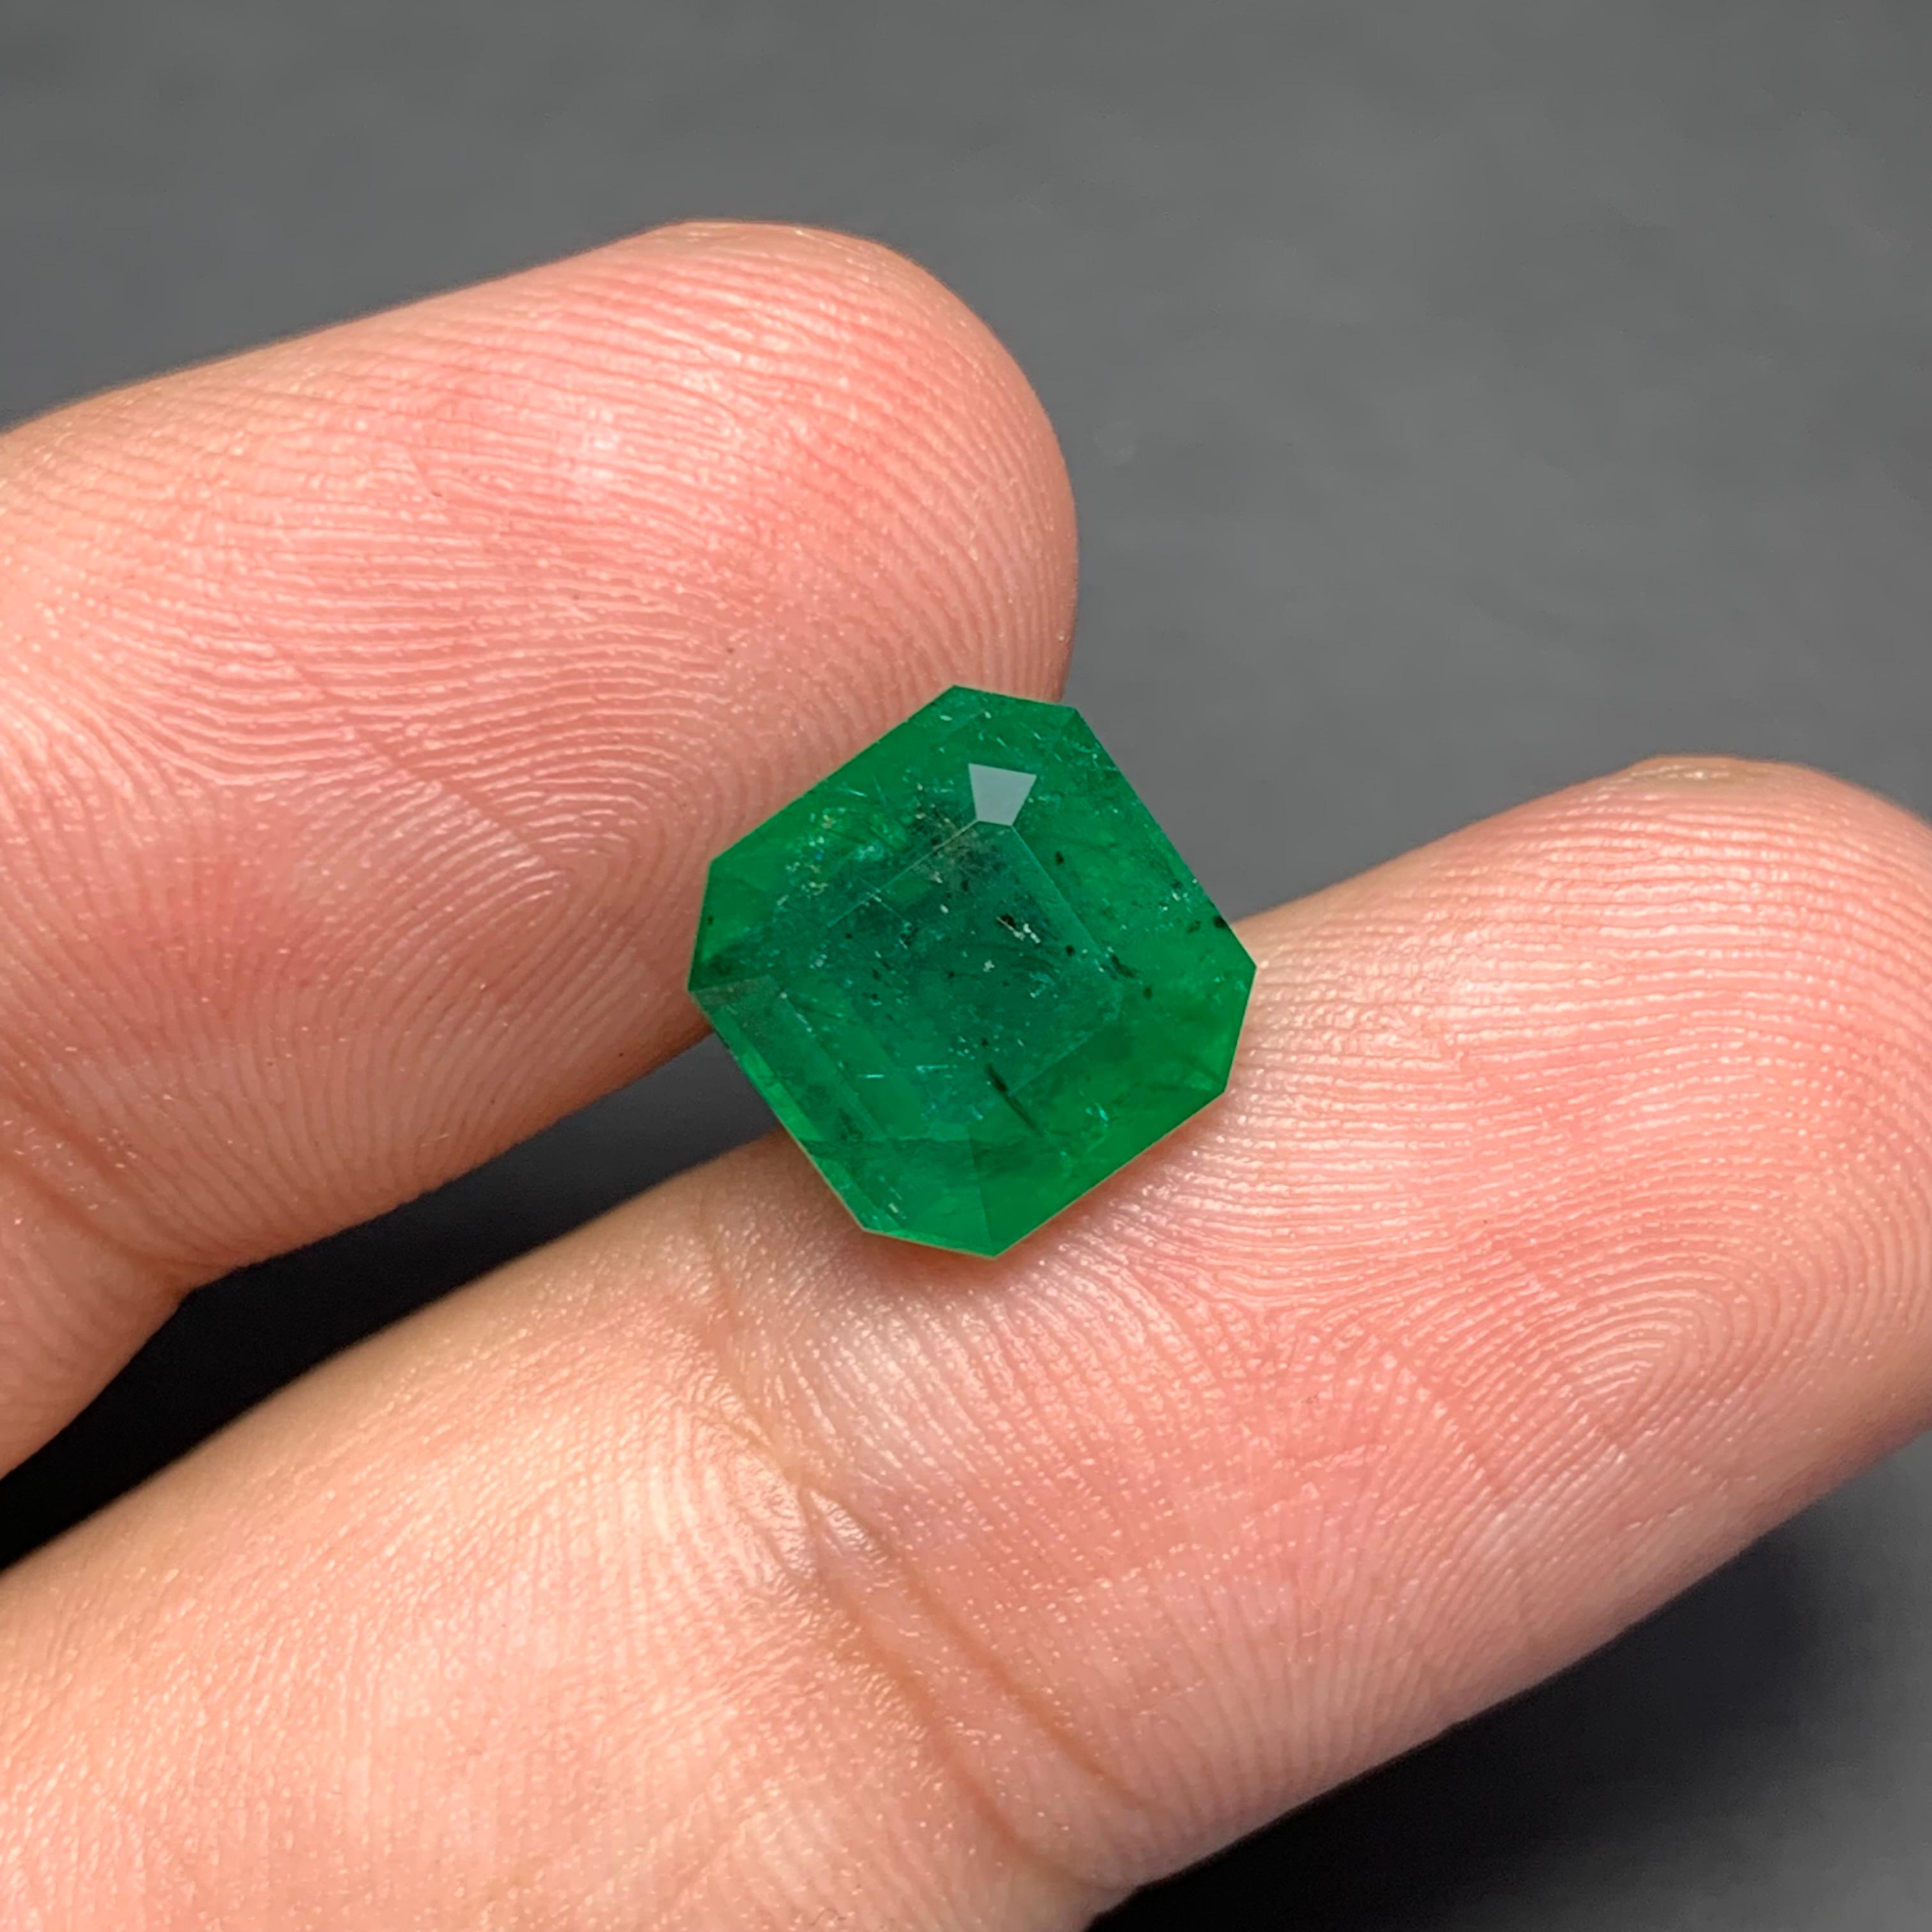 Loose Emerald
Weight: 4.10 Carats 
Dimension: 9.3x9.1x6.5 Mm
Origin: Zambia
Color: Green
Certificate: On Customer Demand 
Treatment: Non
.
Zambia, often referred to as the 